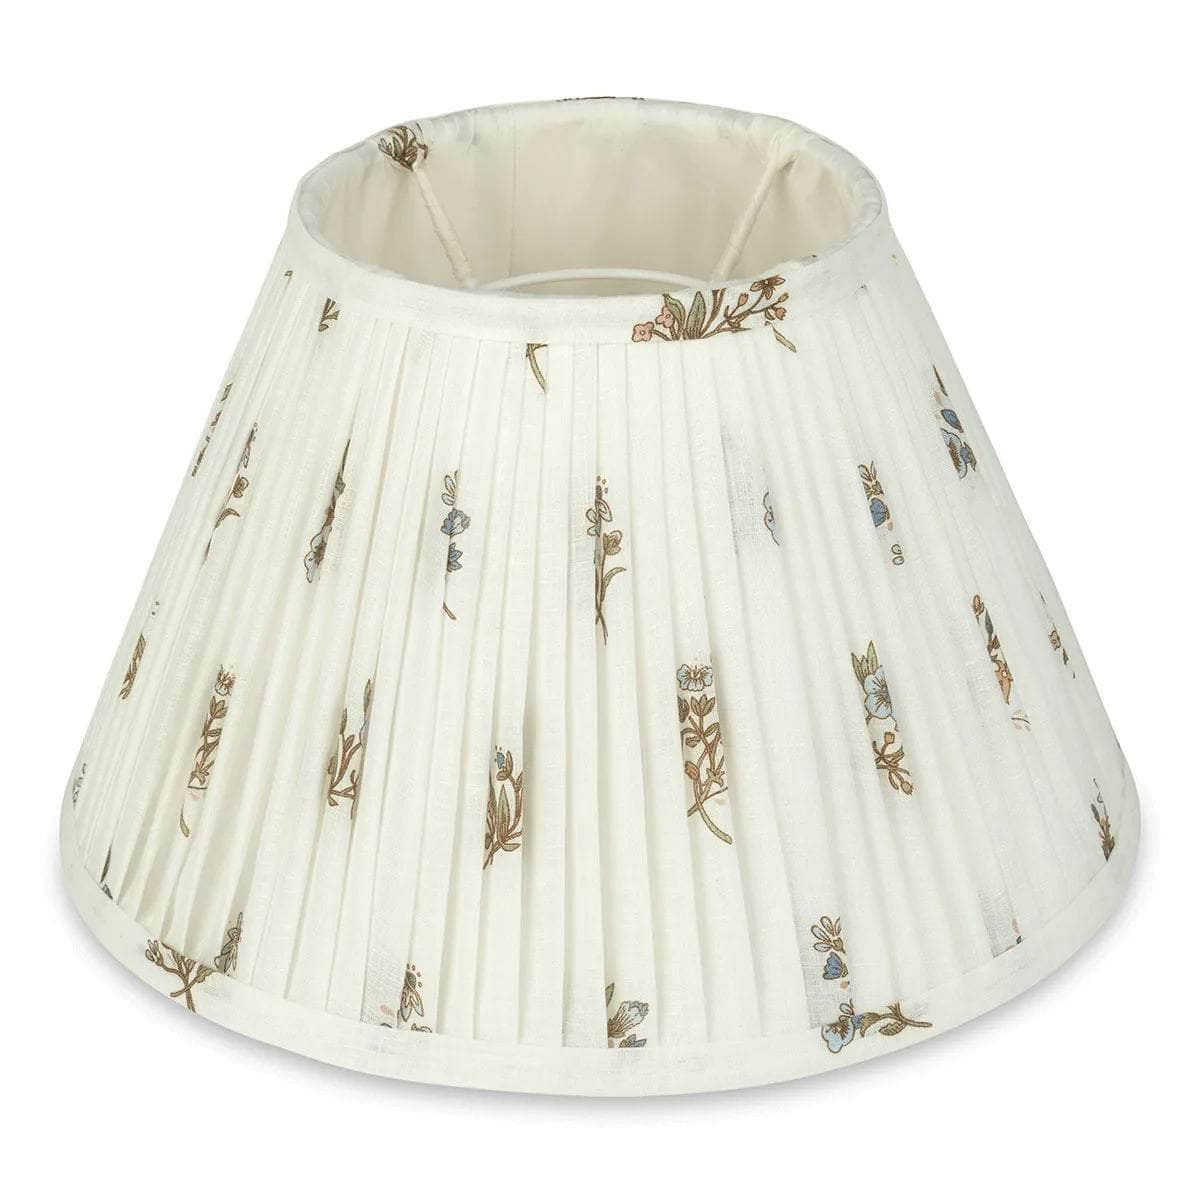 Hand Pleated Empire Lampshade in Printed Voile